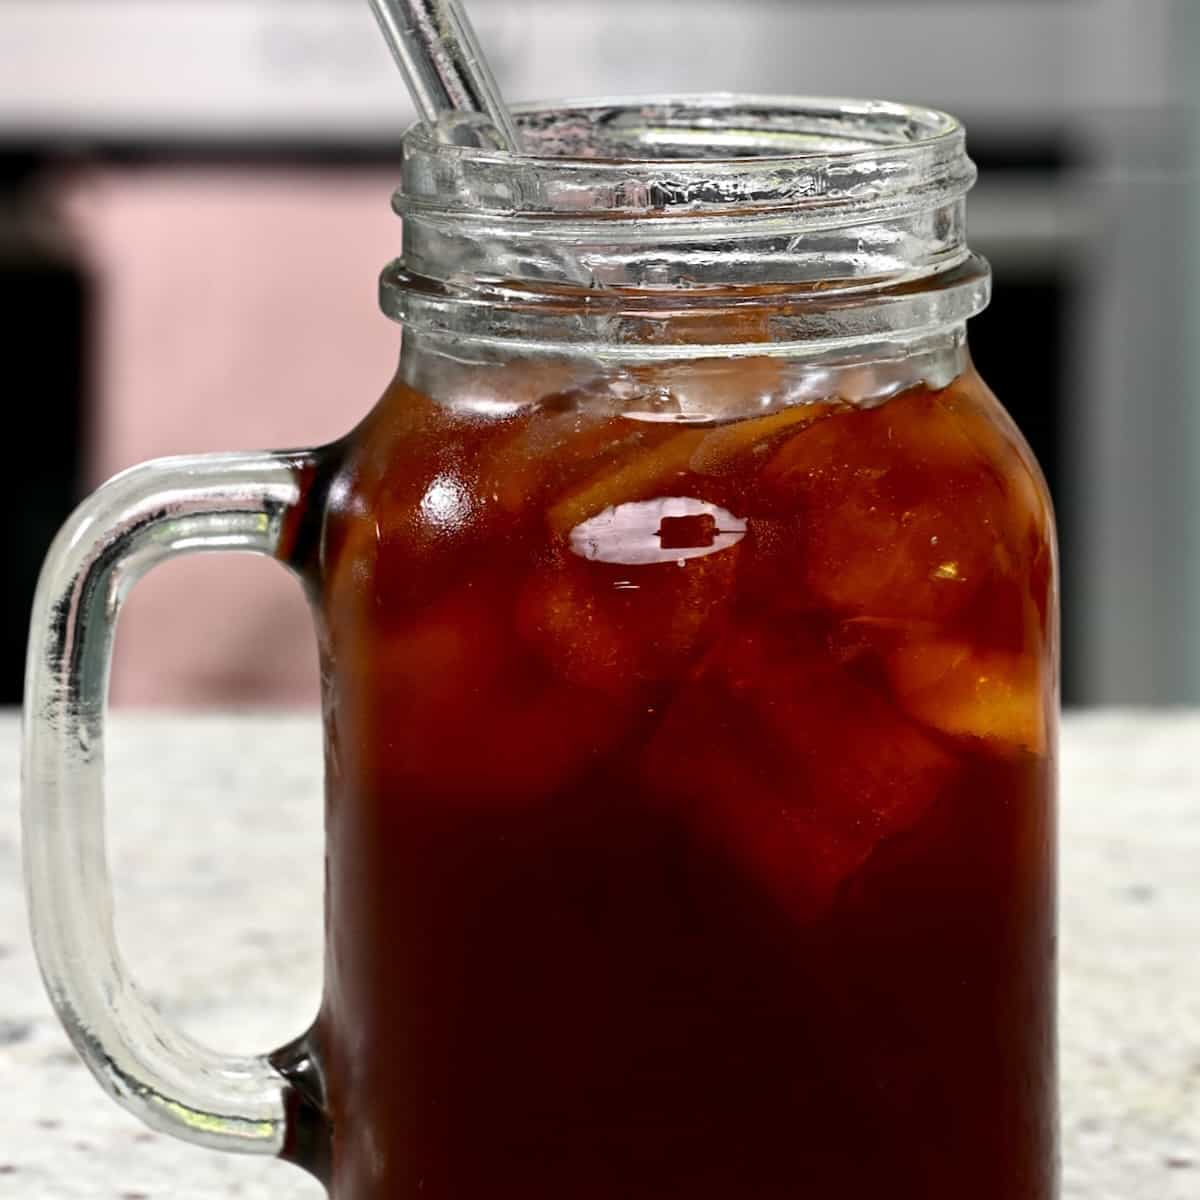 https://www.alphafoodie.com/wp-content/uploads/2022/07/Cold-Brew-Coffee-2-of-2.jpeg